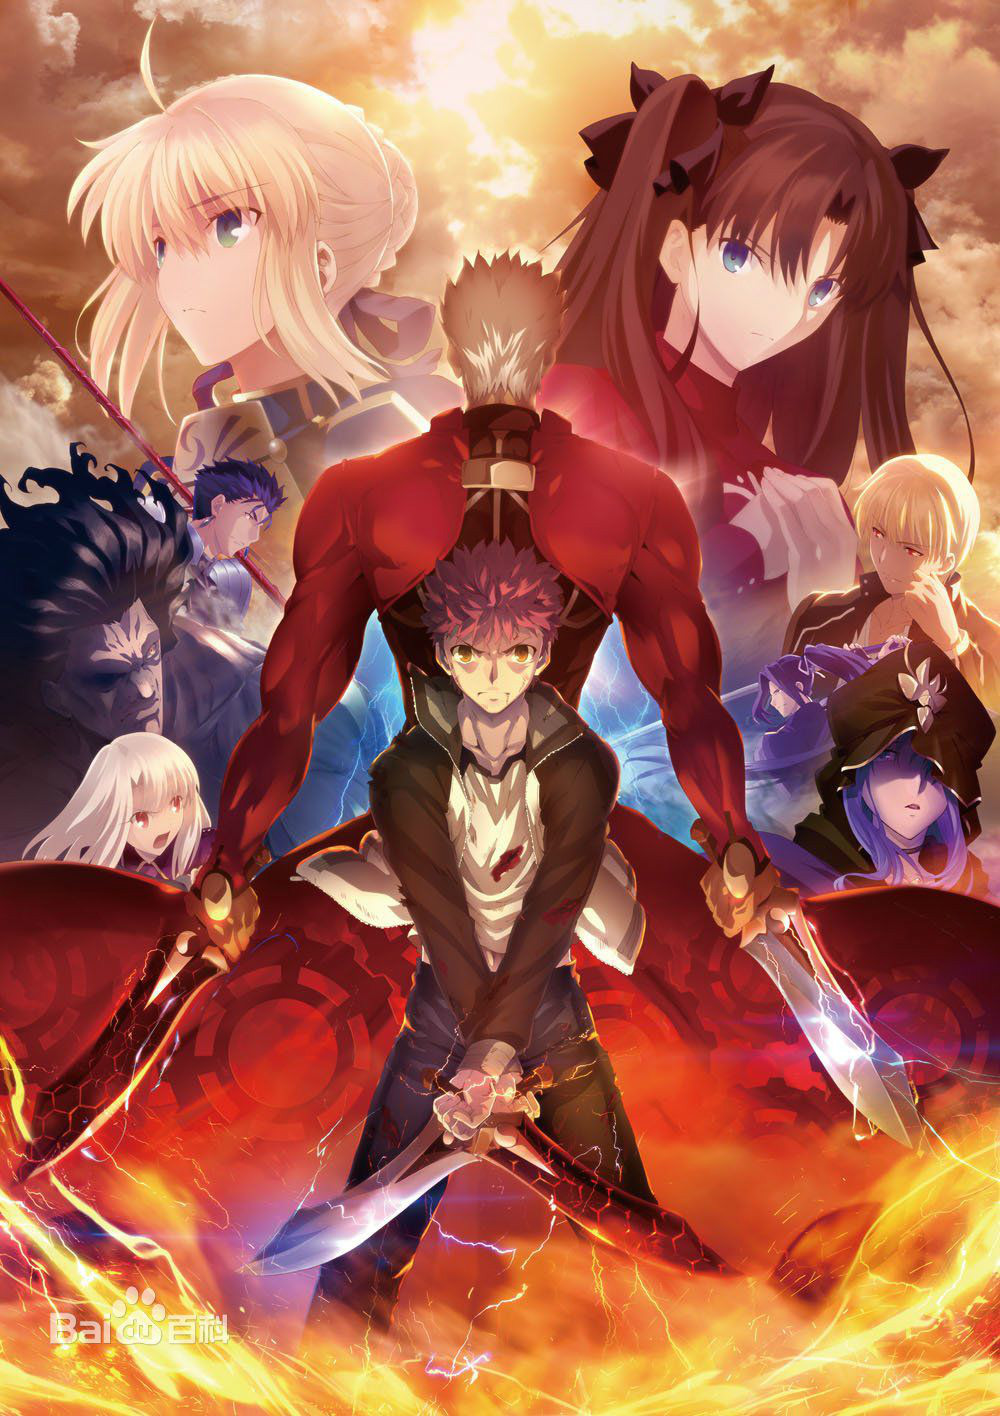 Fate/stay night (Unlimited Blade Works)